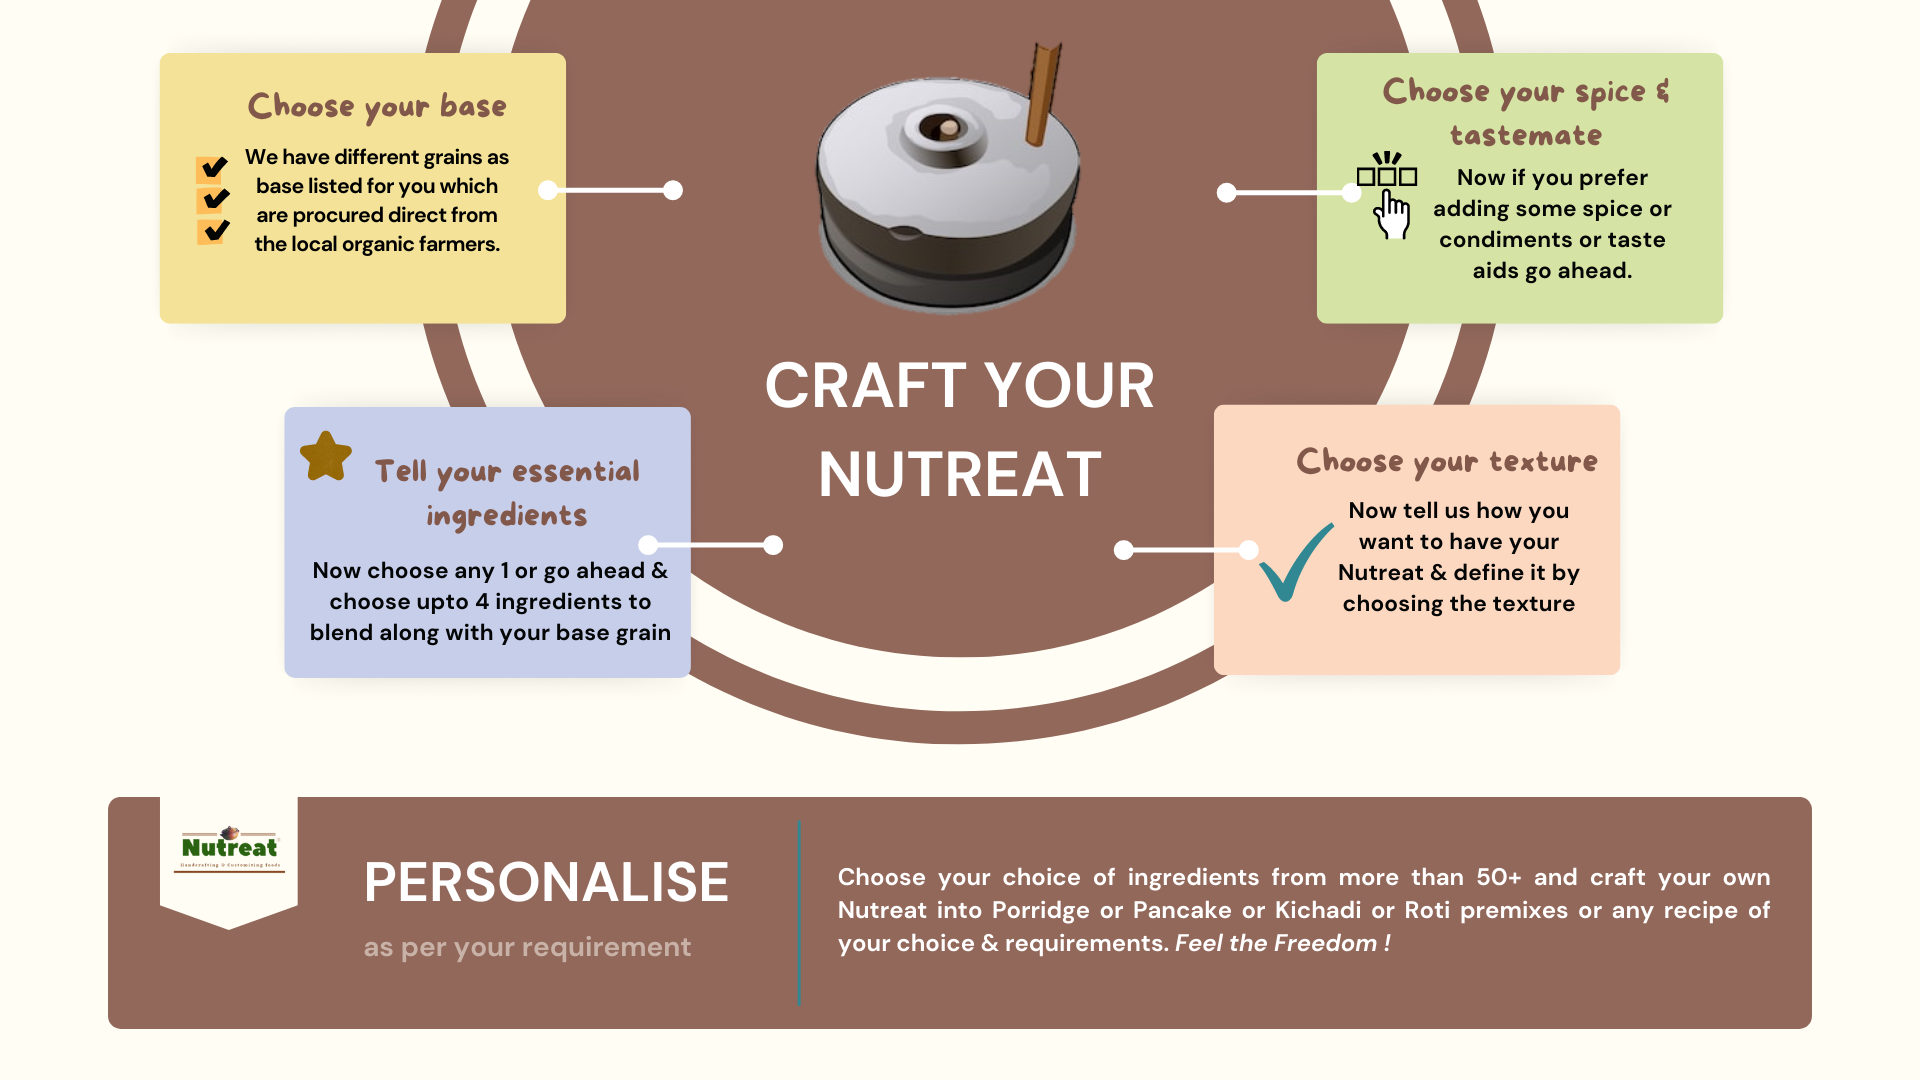 How to customize Nutreat in just 4 easy steps | Select your base, Select your essential ingredients, select your spice & select your texture